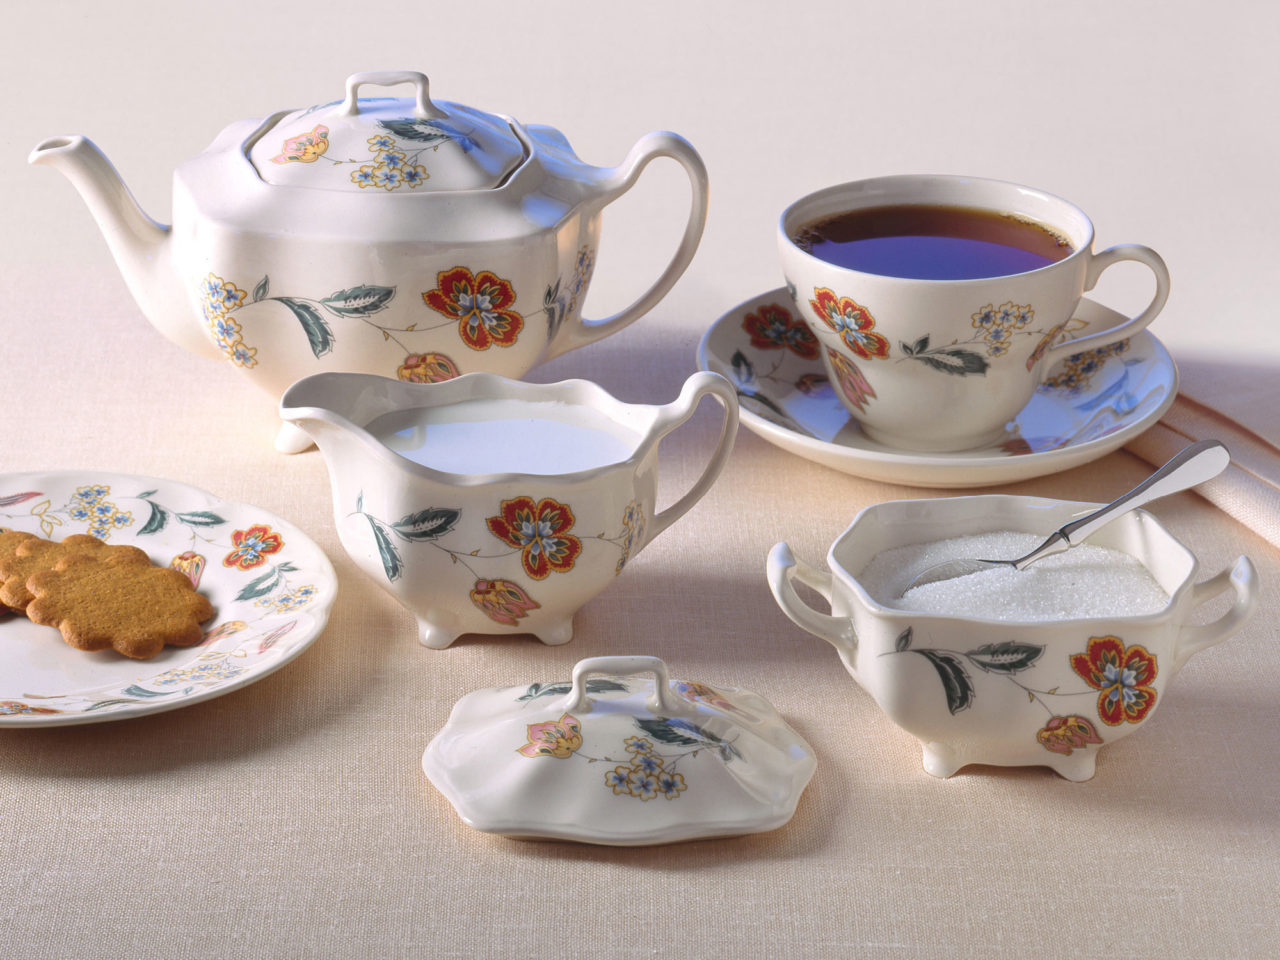 White crockery with multicoloured floral pattern, filled coffee cup, sugar bowl, creamer and plate with cookies.